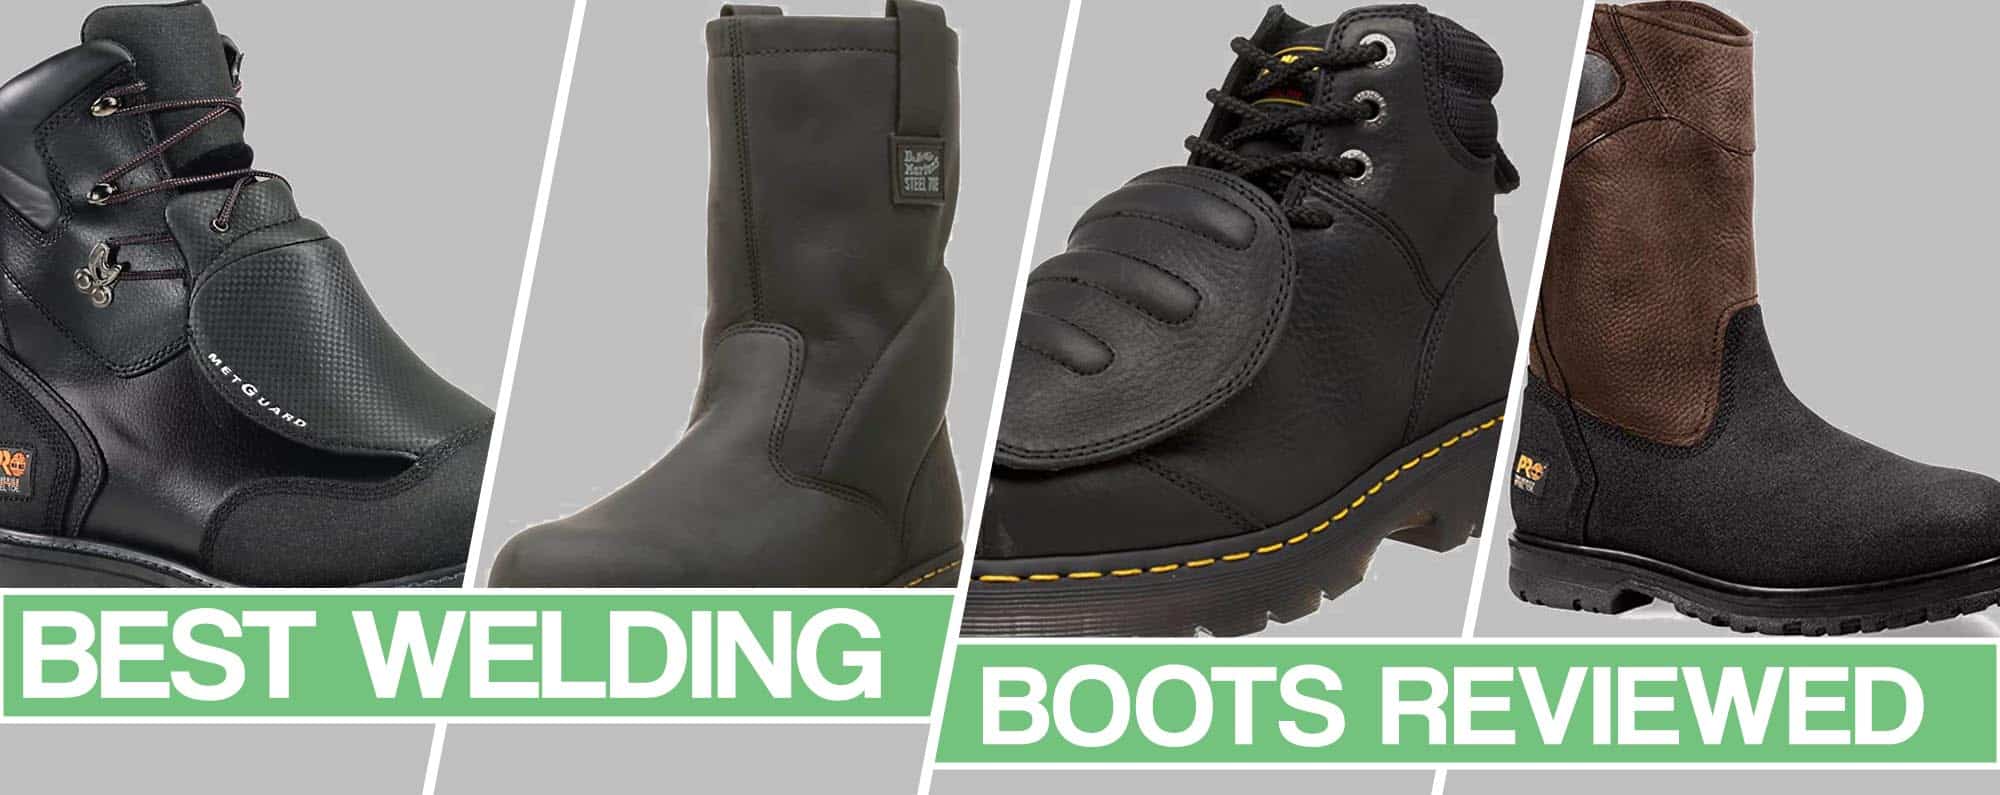 Best Welding Boots Reviews – Serious Work Shoes With Steel toe